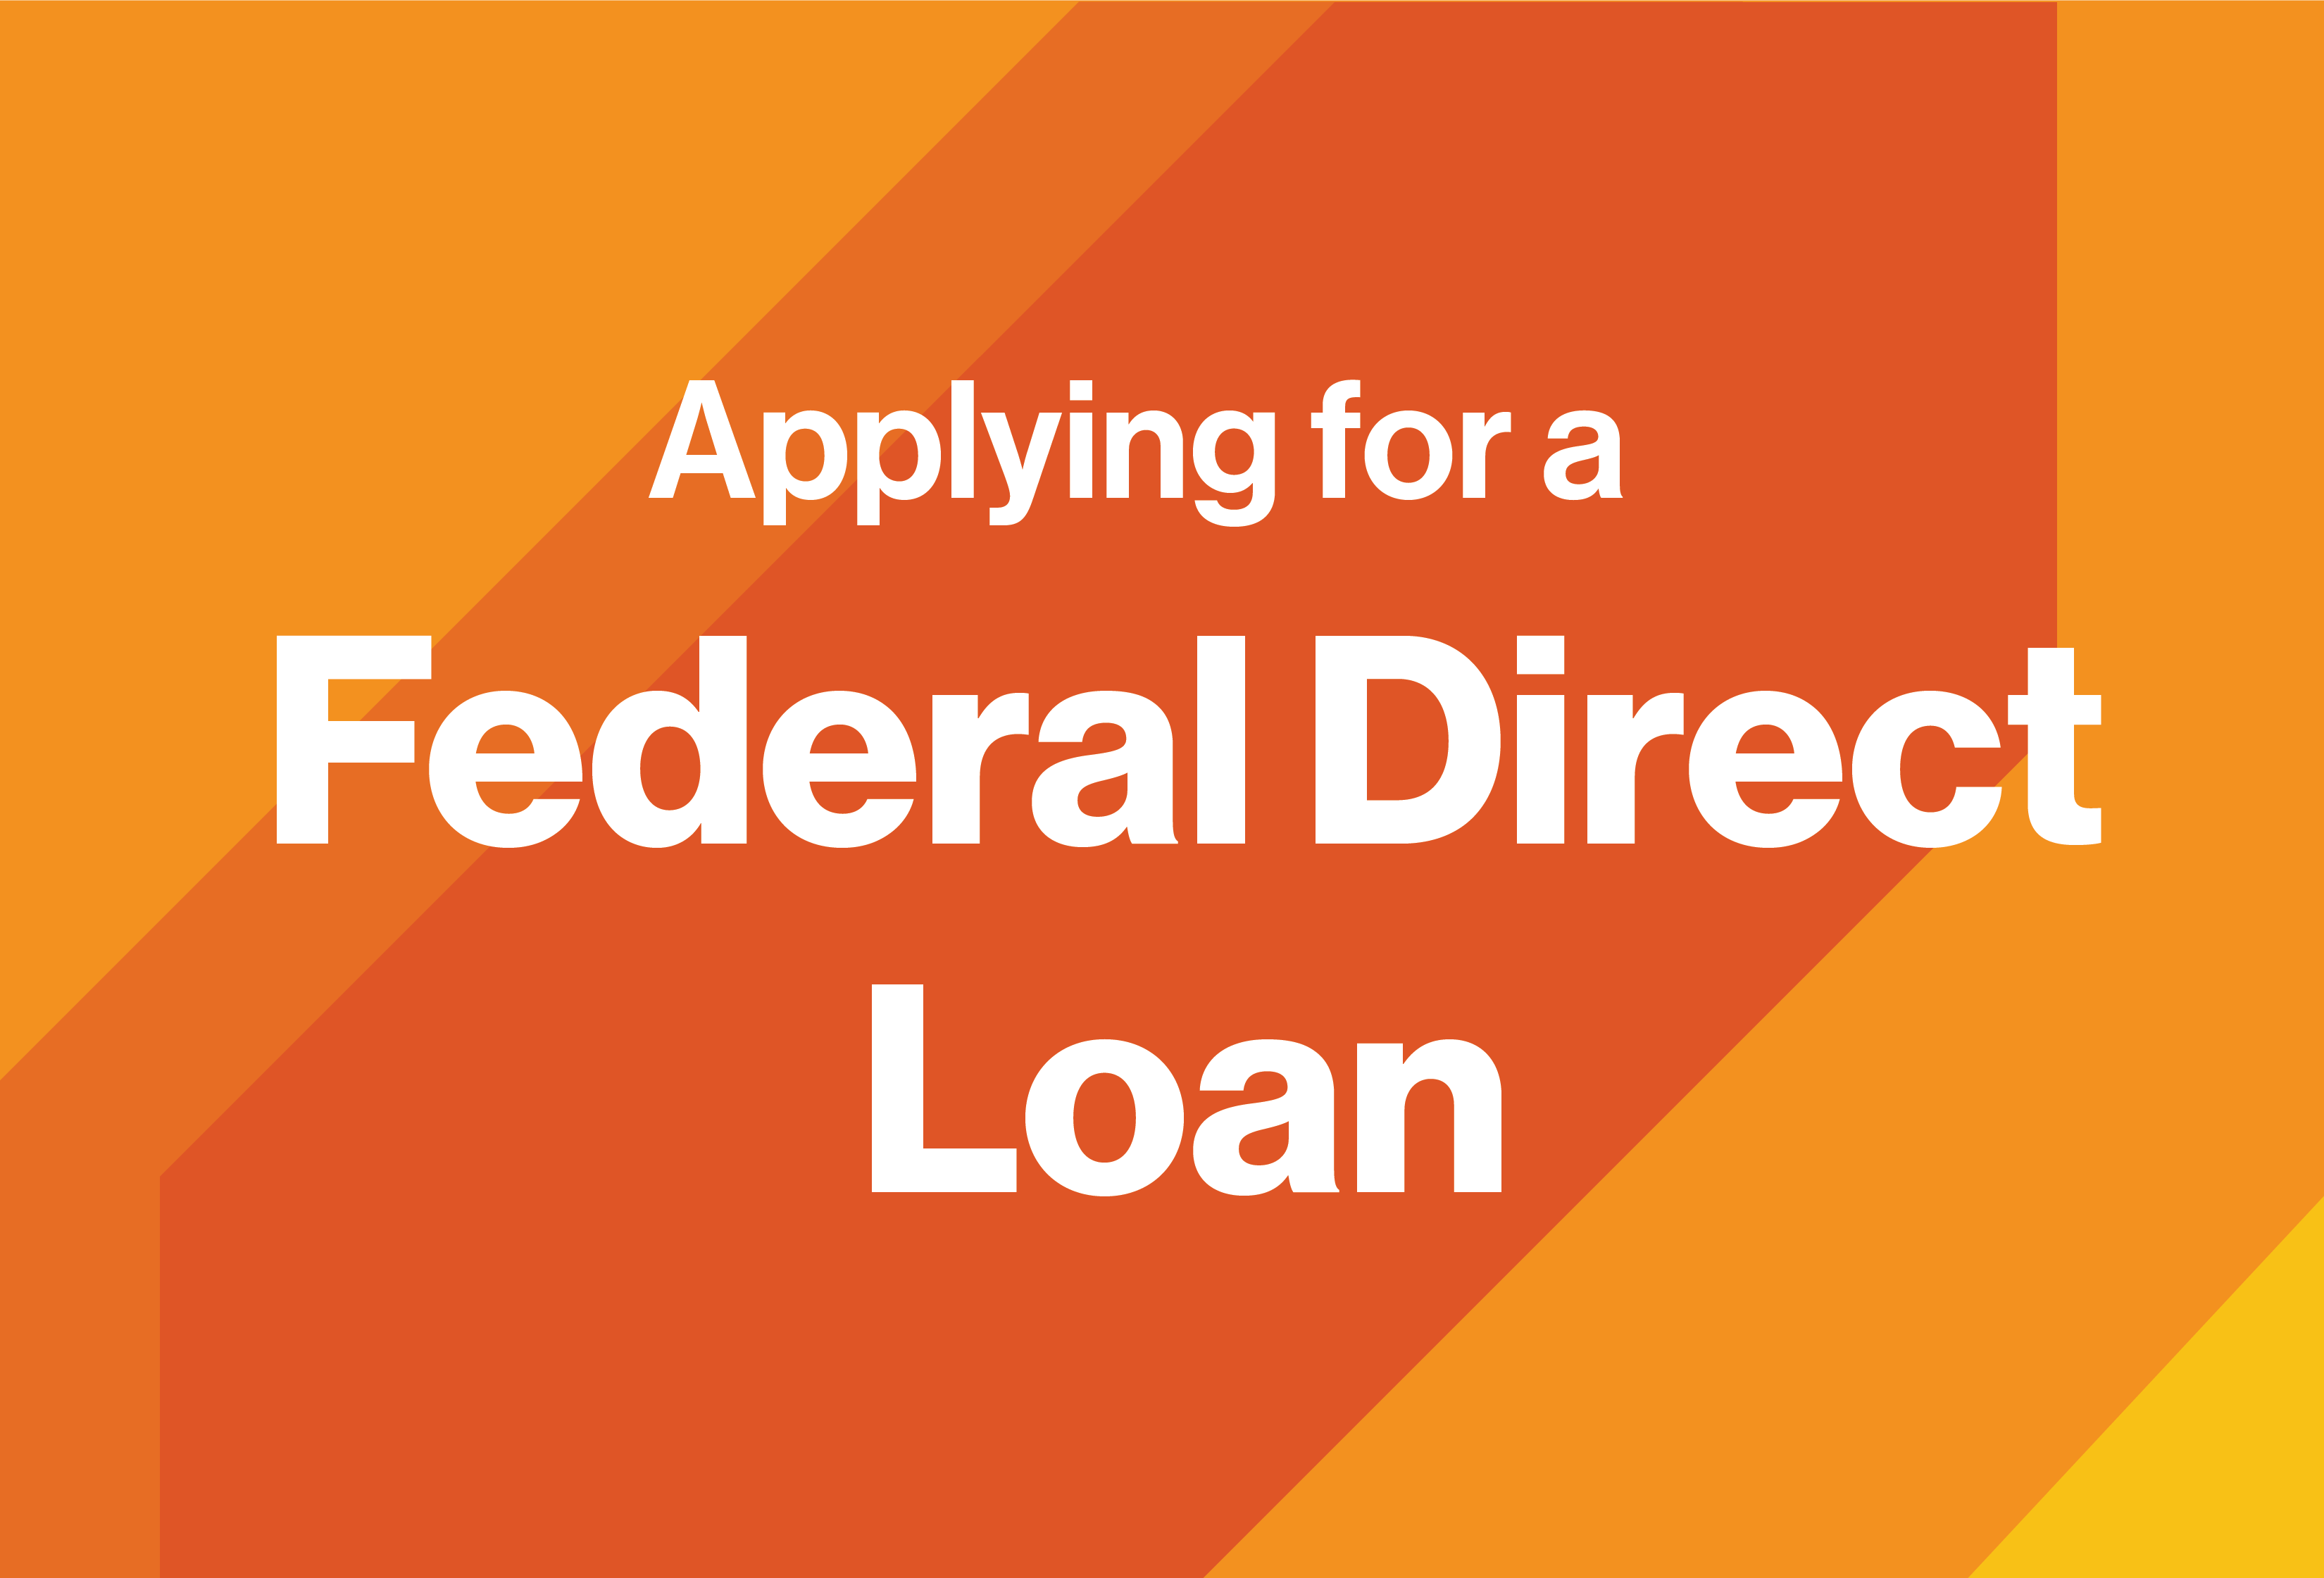 Applying for a Federal Direct Loan